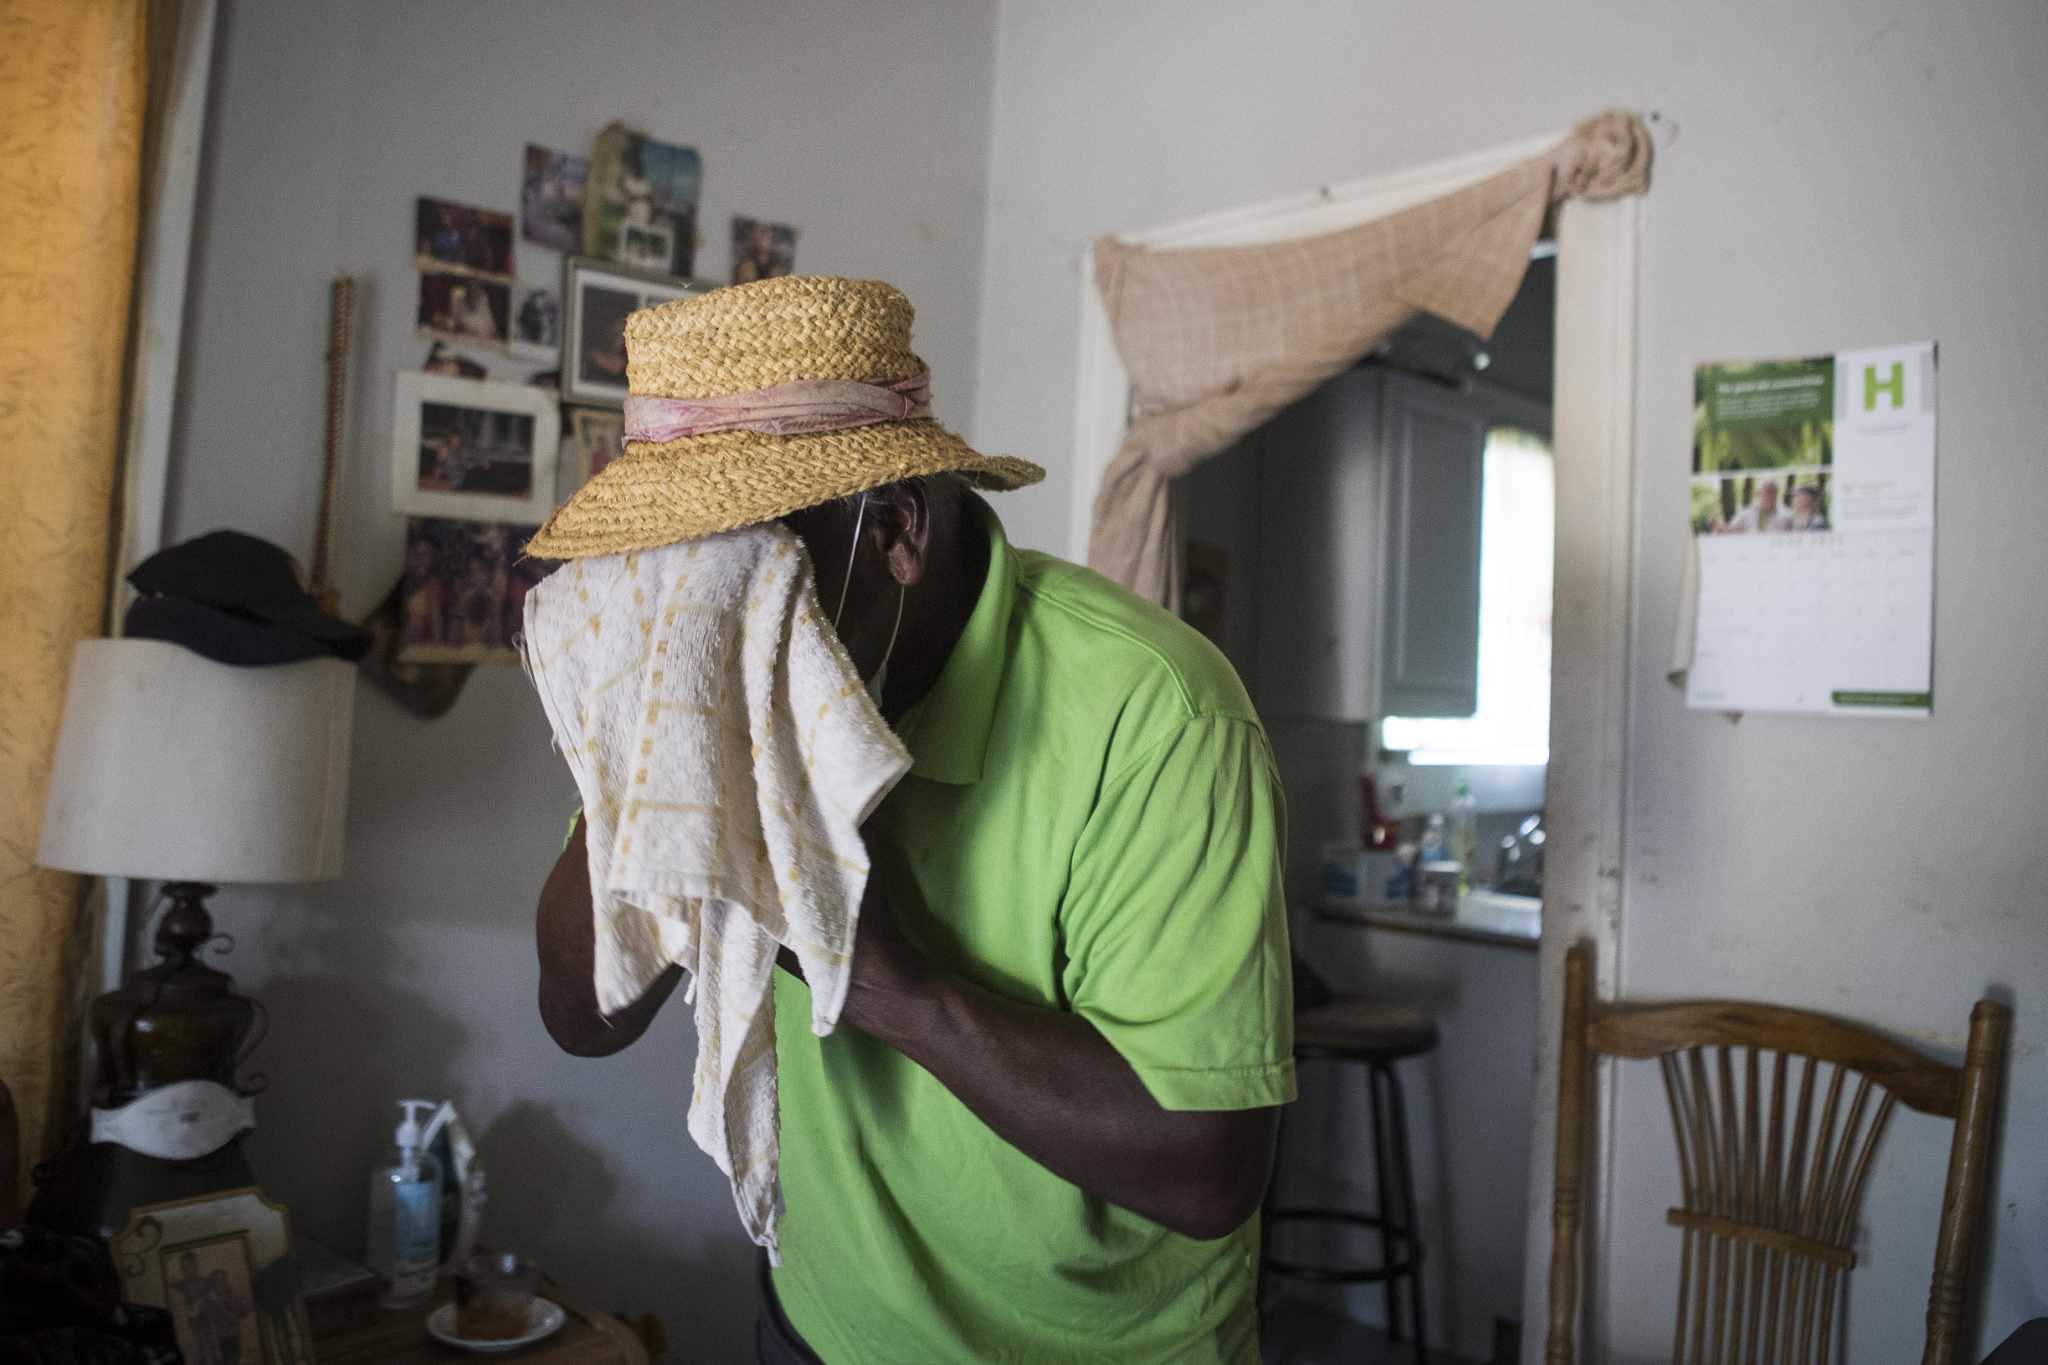 'Already at our doorstep': Houston heat wave drives home the inequality of climate change - Houston Chronicle